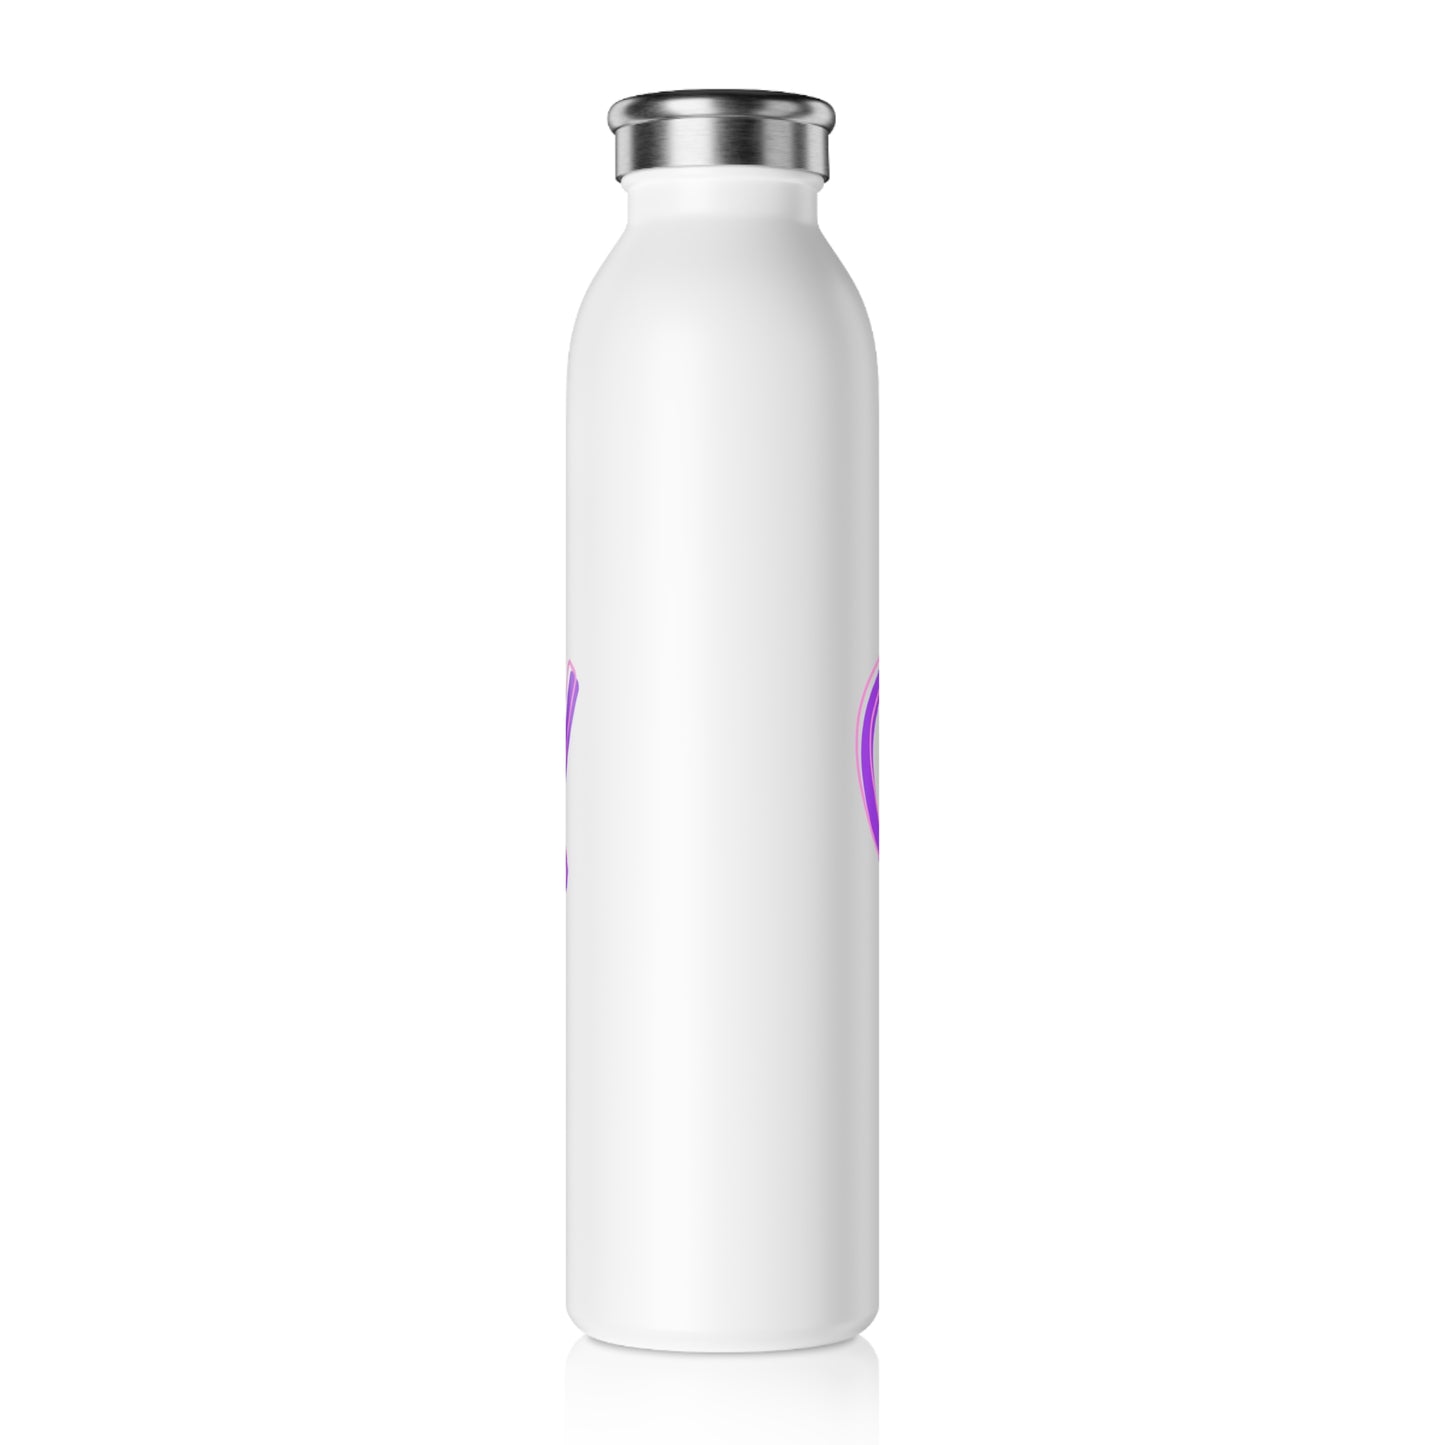 CHILL Workout/Yoga Water Bottle